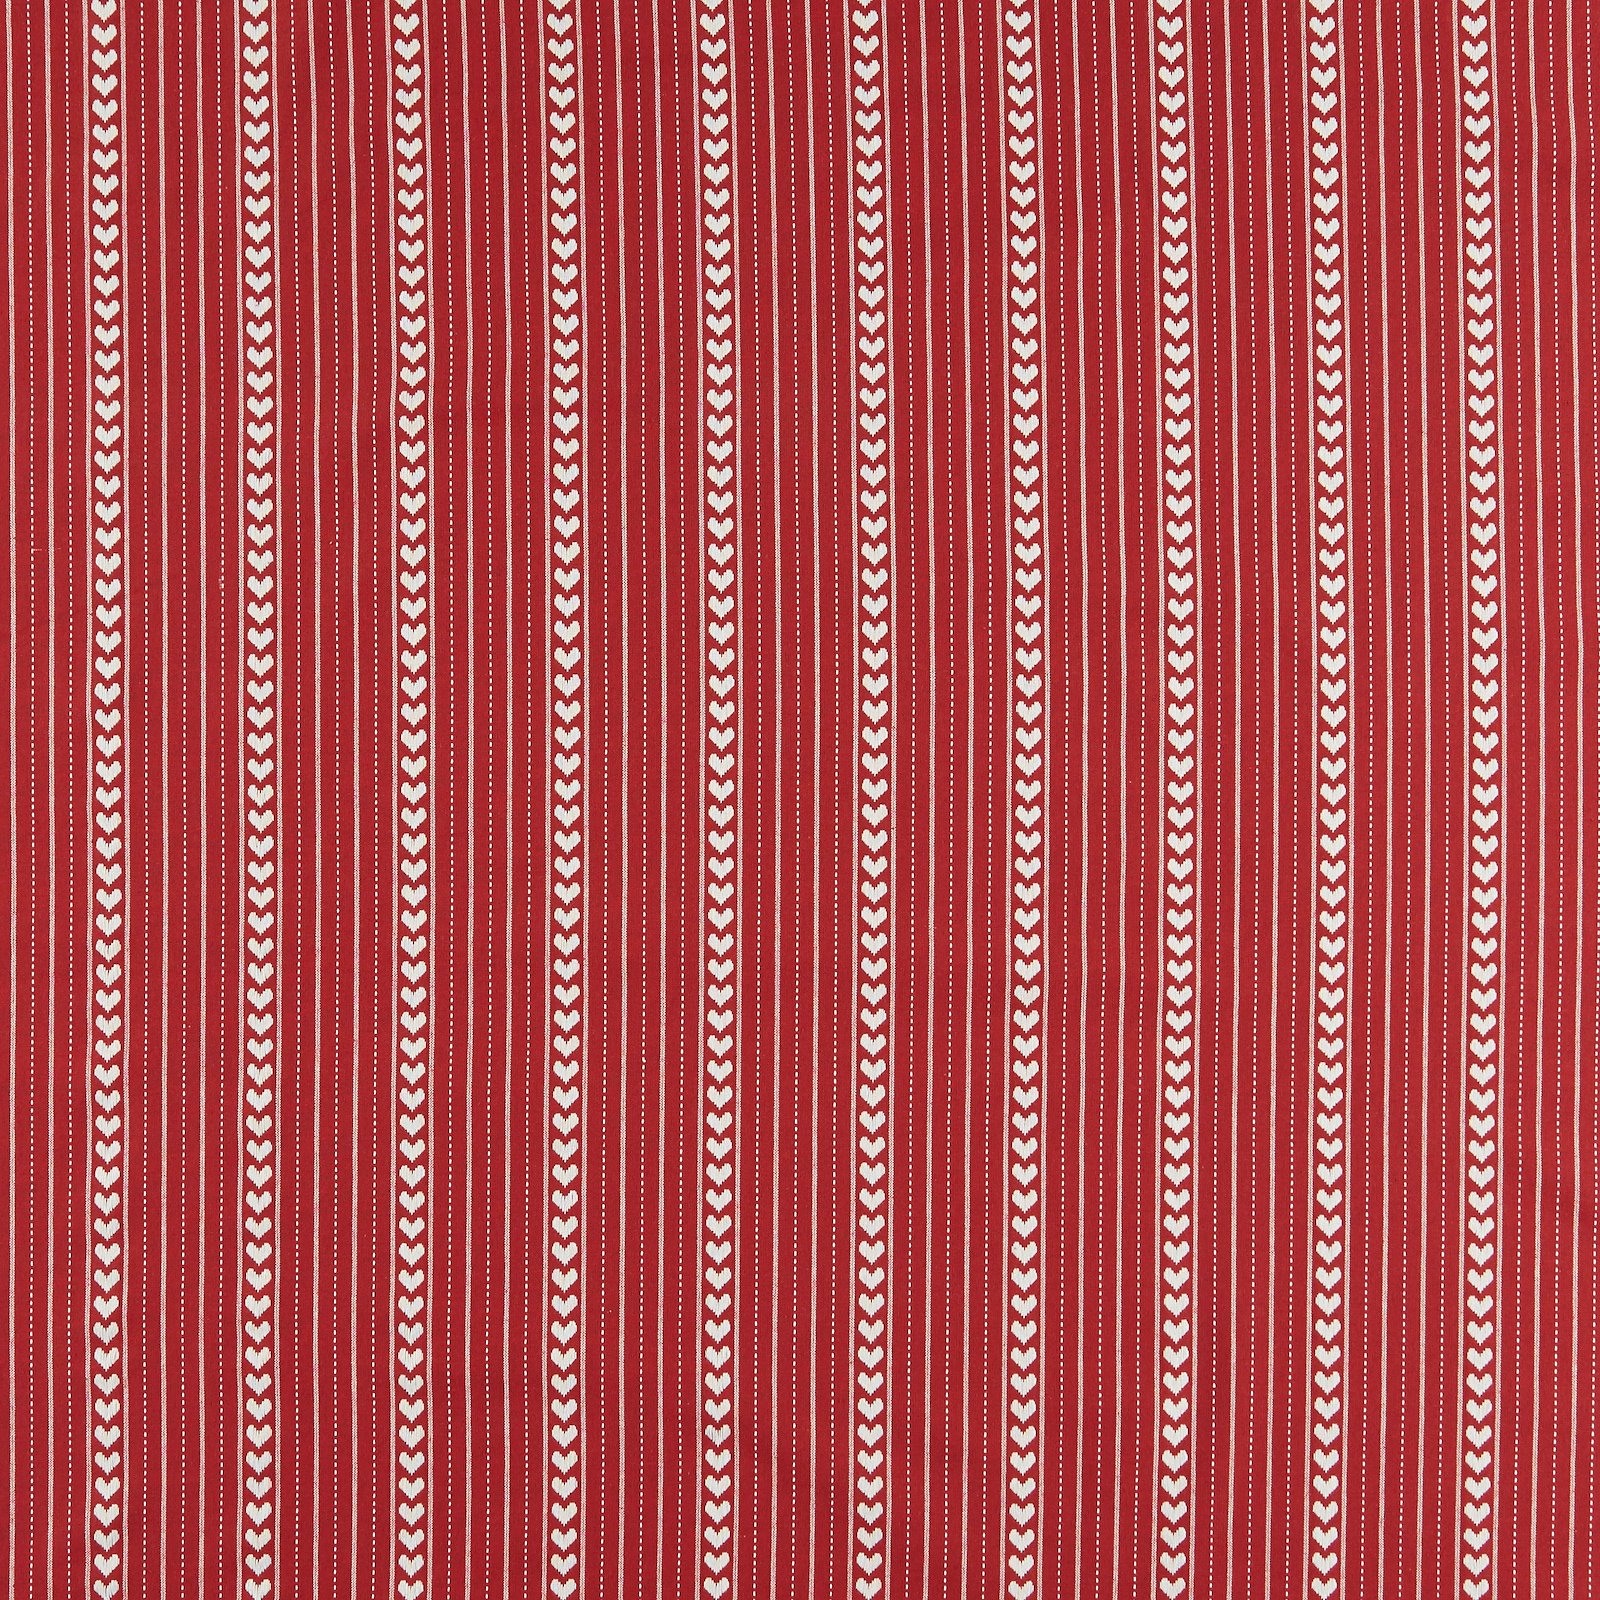 Woven cotton red w YD stripes and hearts 816314_pack_solid